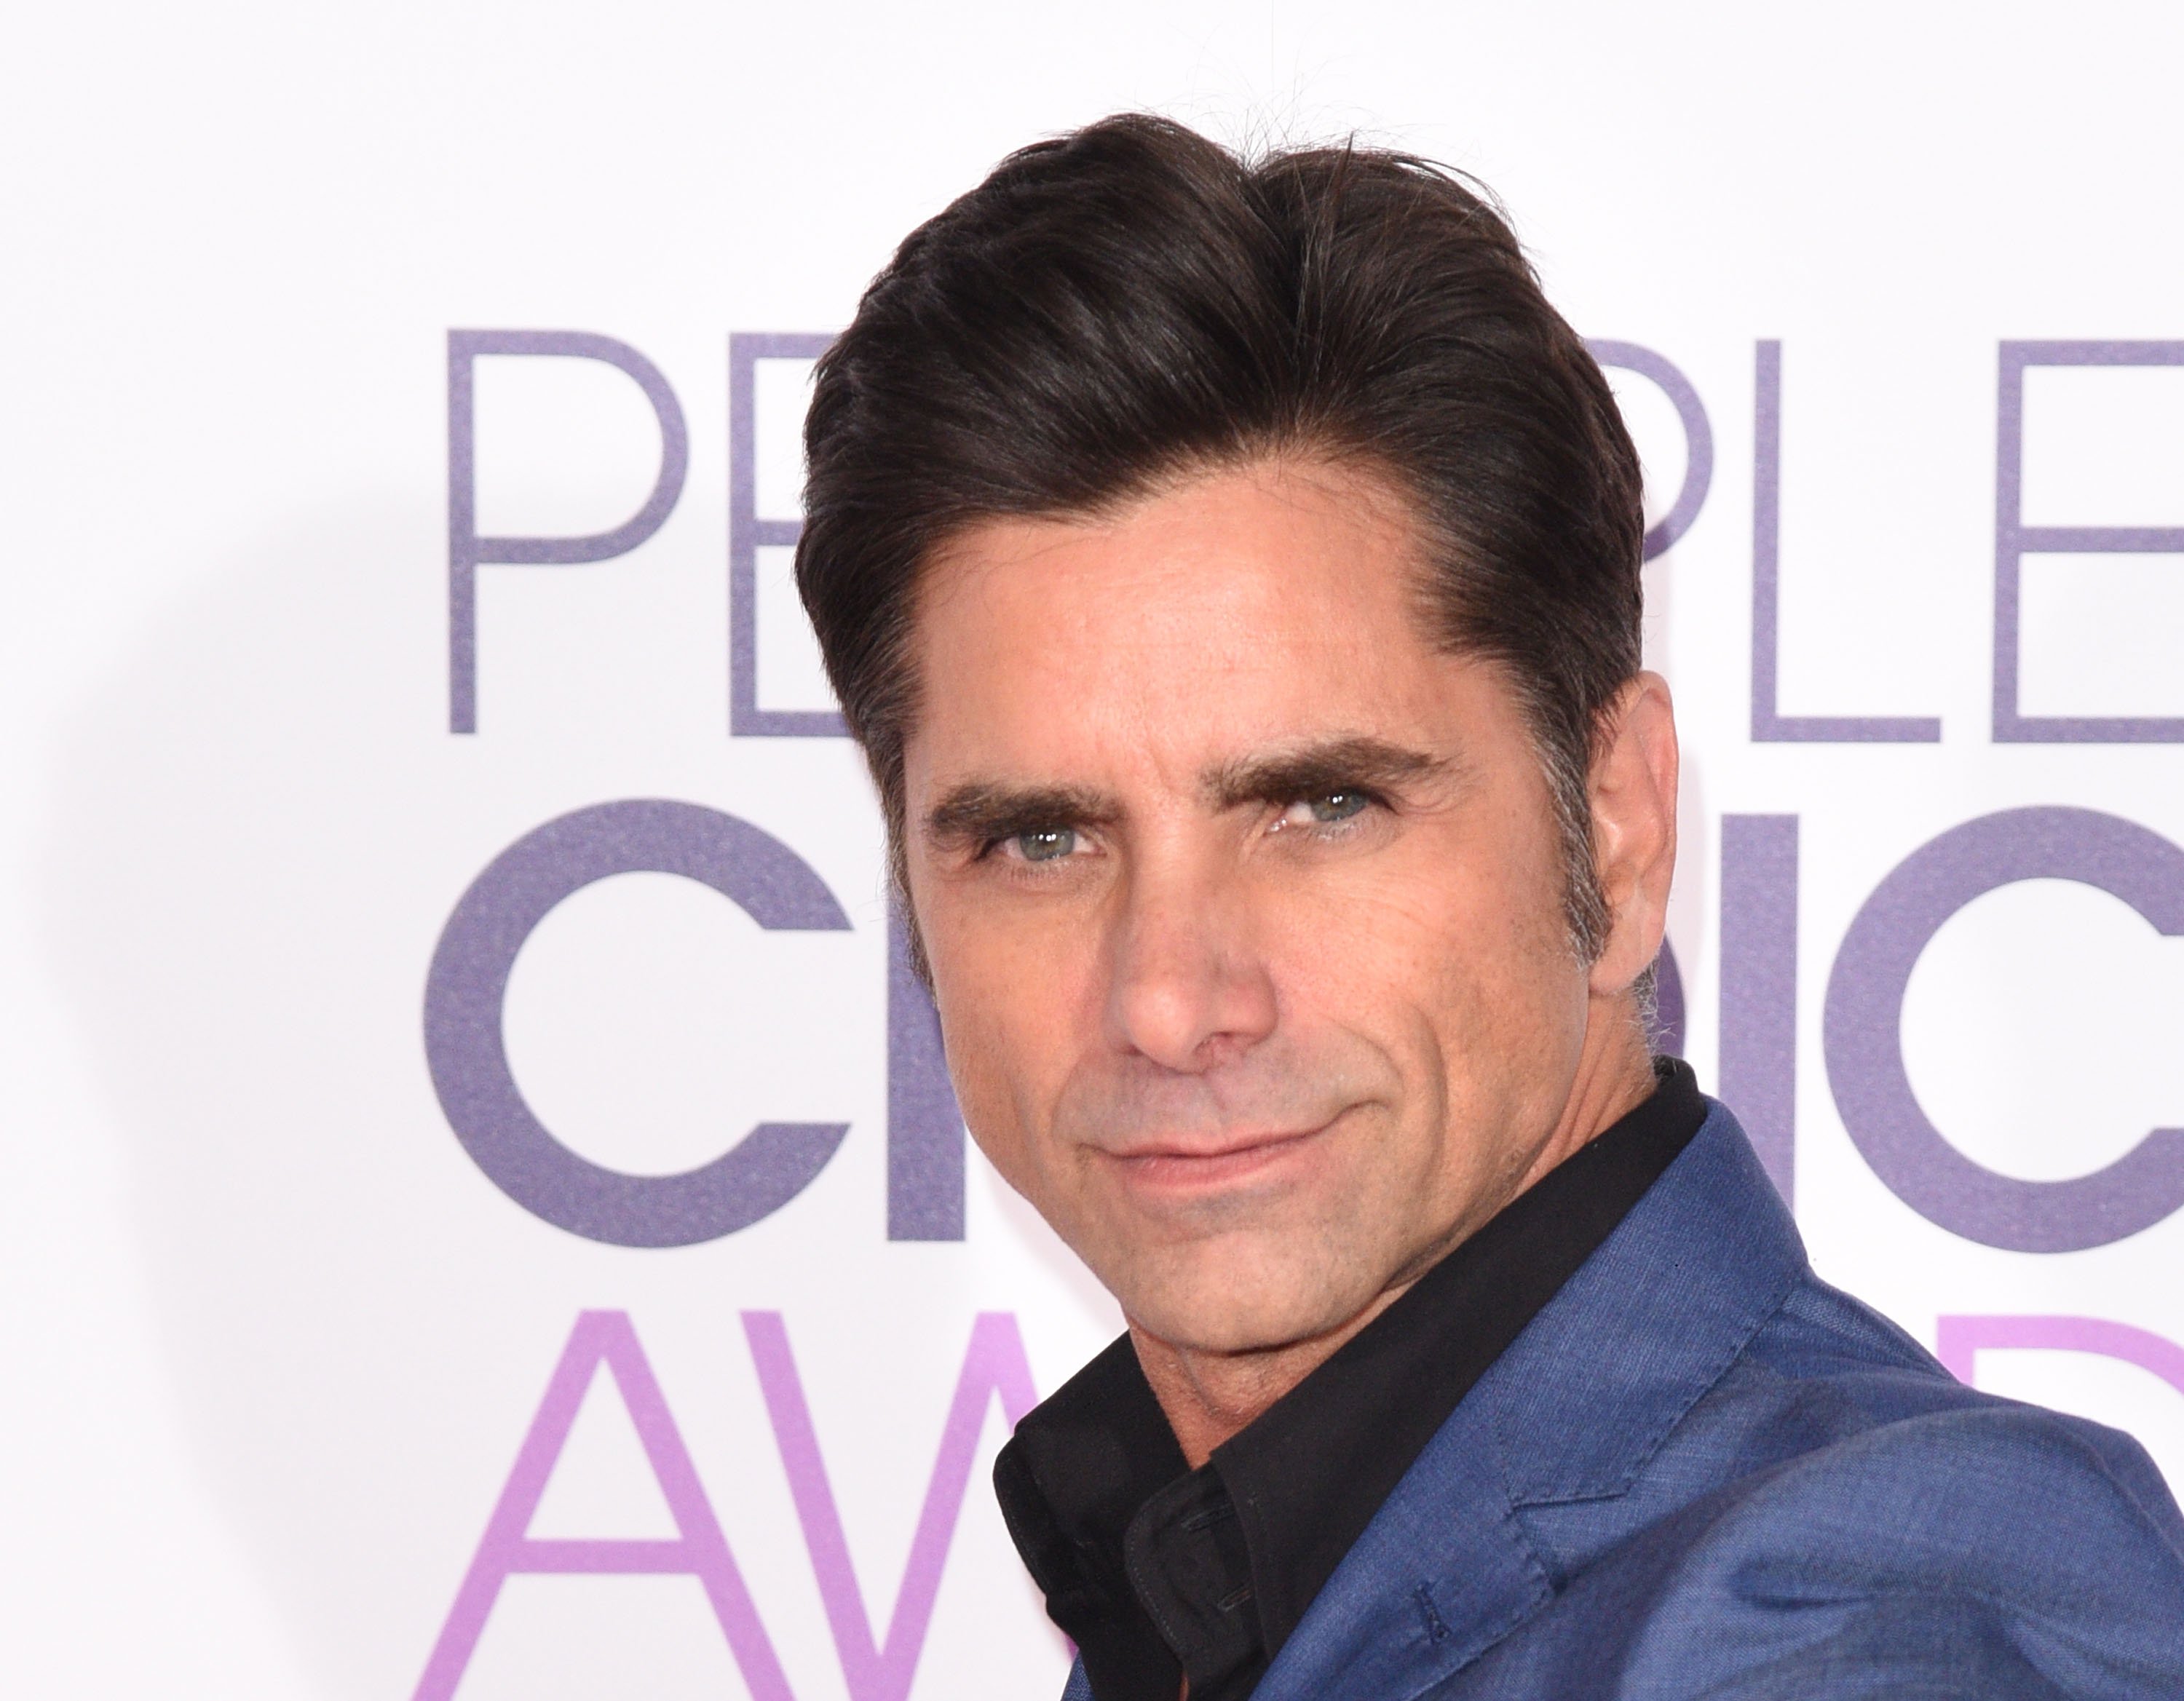 Actor John Stamos attends the People's Choice Awards 2017 in Los Angeles | Photo: Getty Images